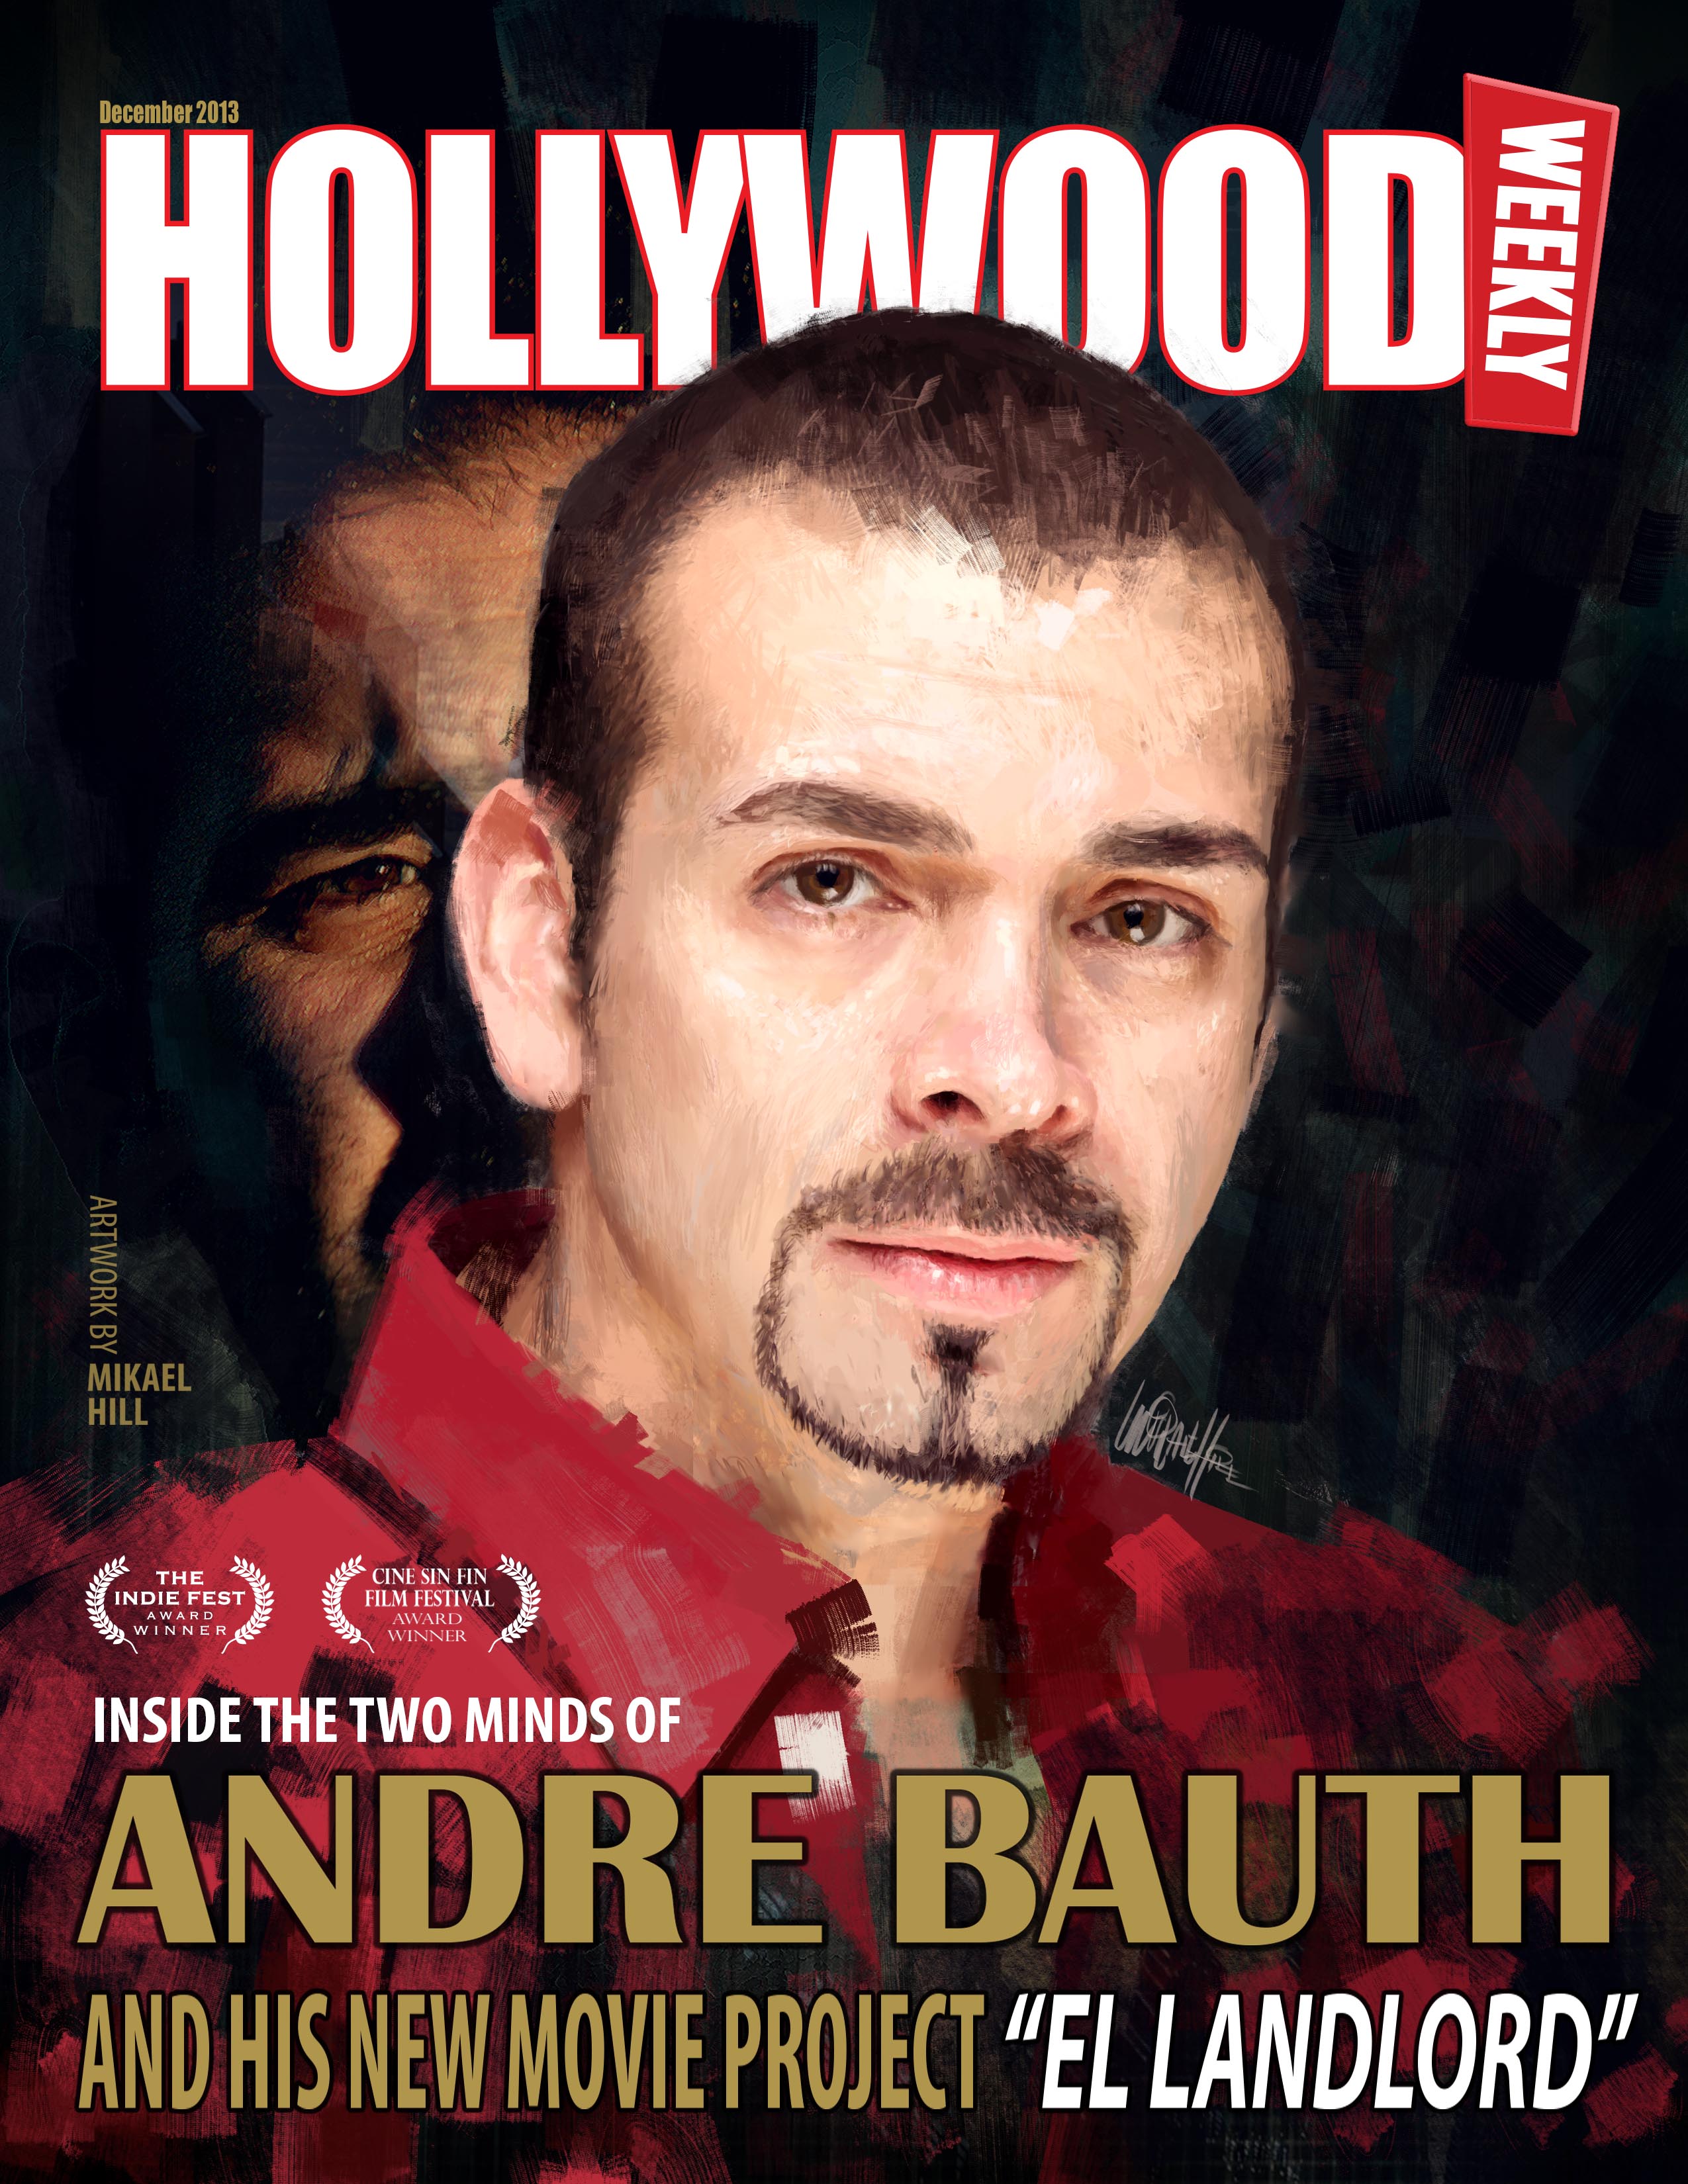 Andre Bauth on the cover of Hollywood Weekly Magazine December 2013